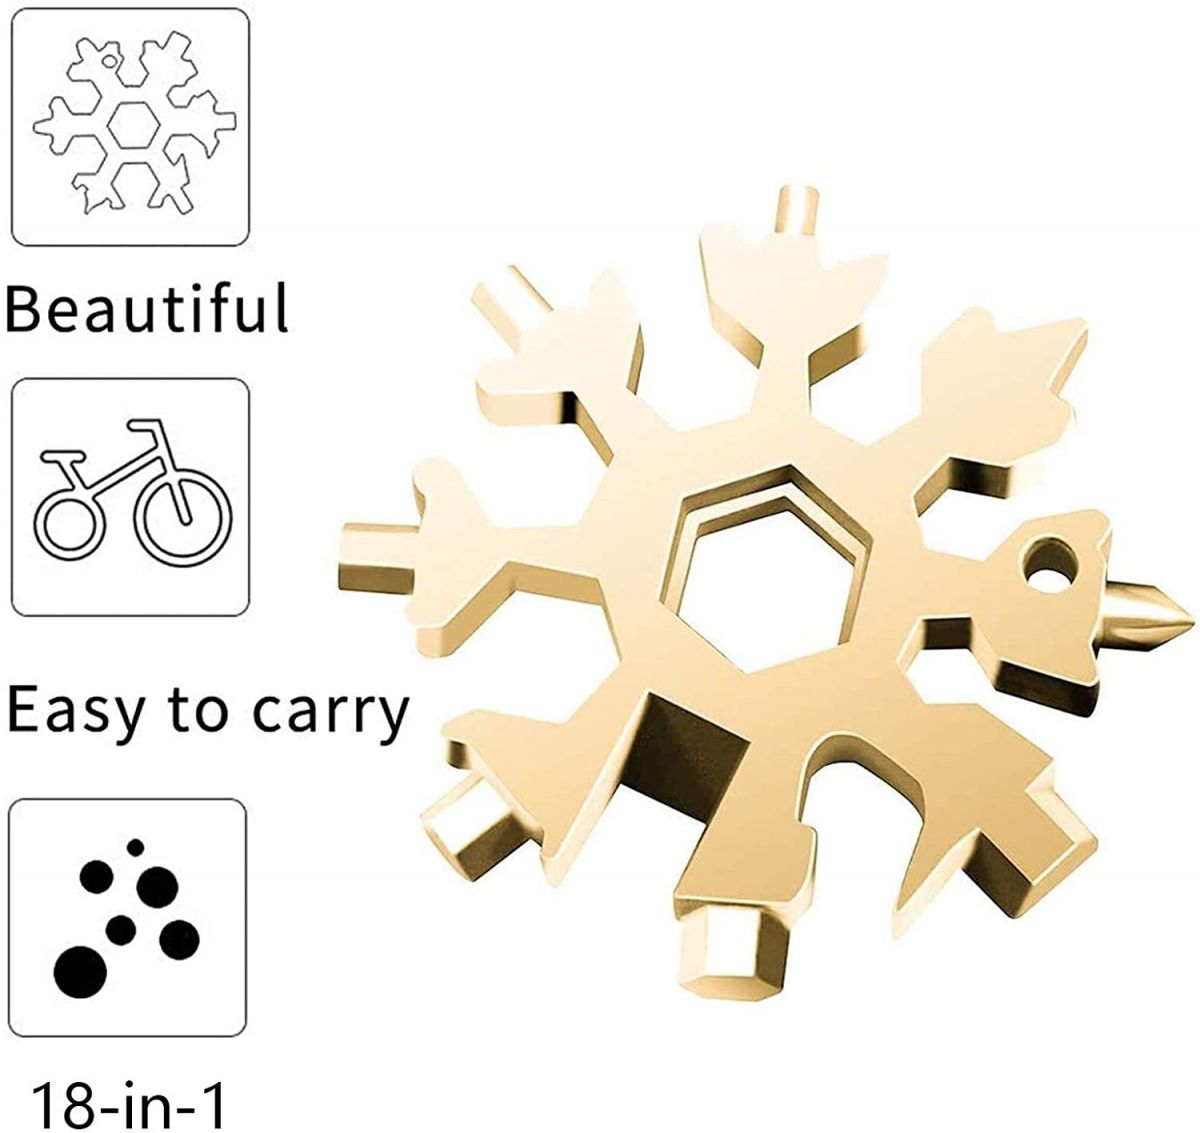 Multifunctional keychain "Snowflake" made of stainless steel. (gold)